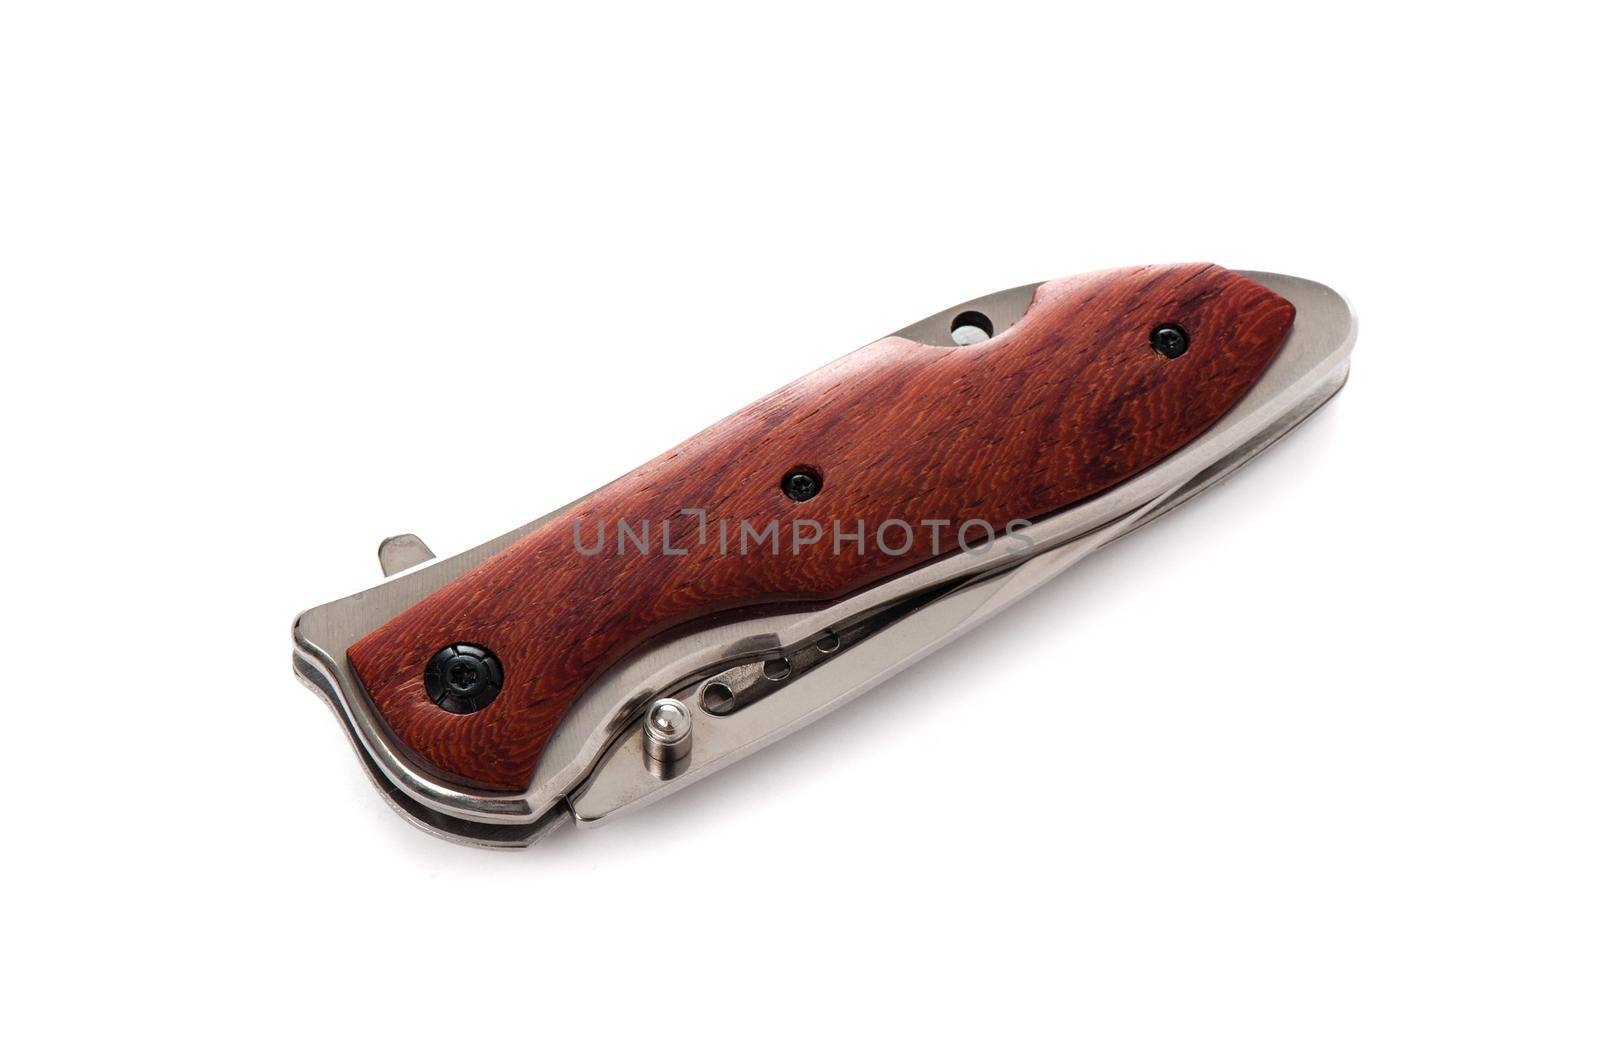 stainless steel folding knife with wooden handle isolated over white background